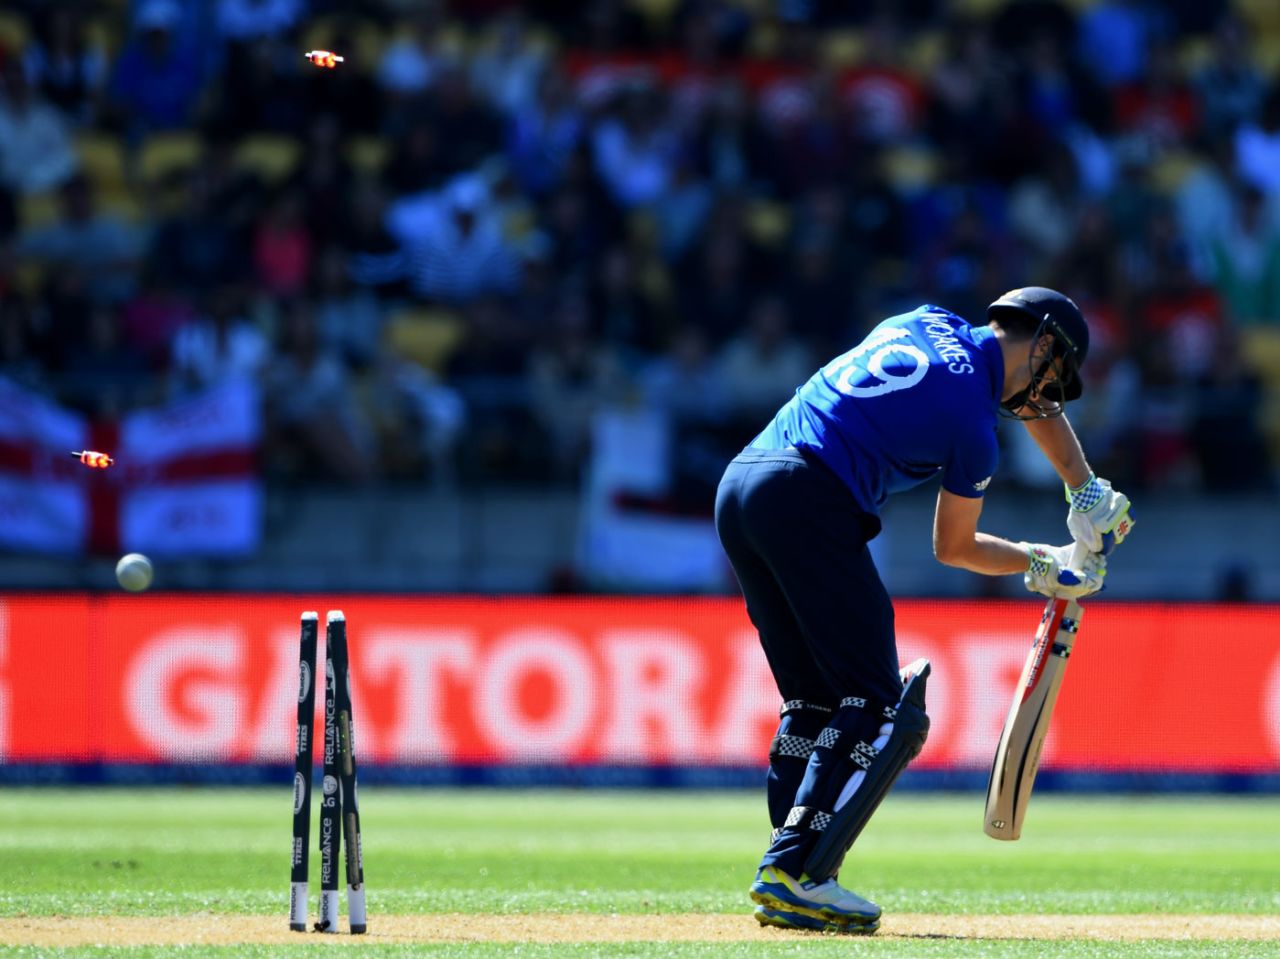 Chris Woakes is bowled by Tim Southee, New Zealand v England, World Cup 2015, Group A, Wellington, February 20, 2015